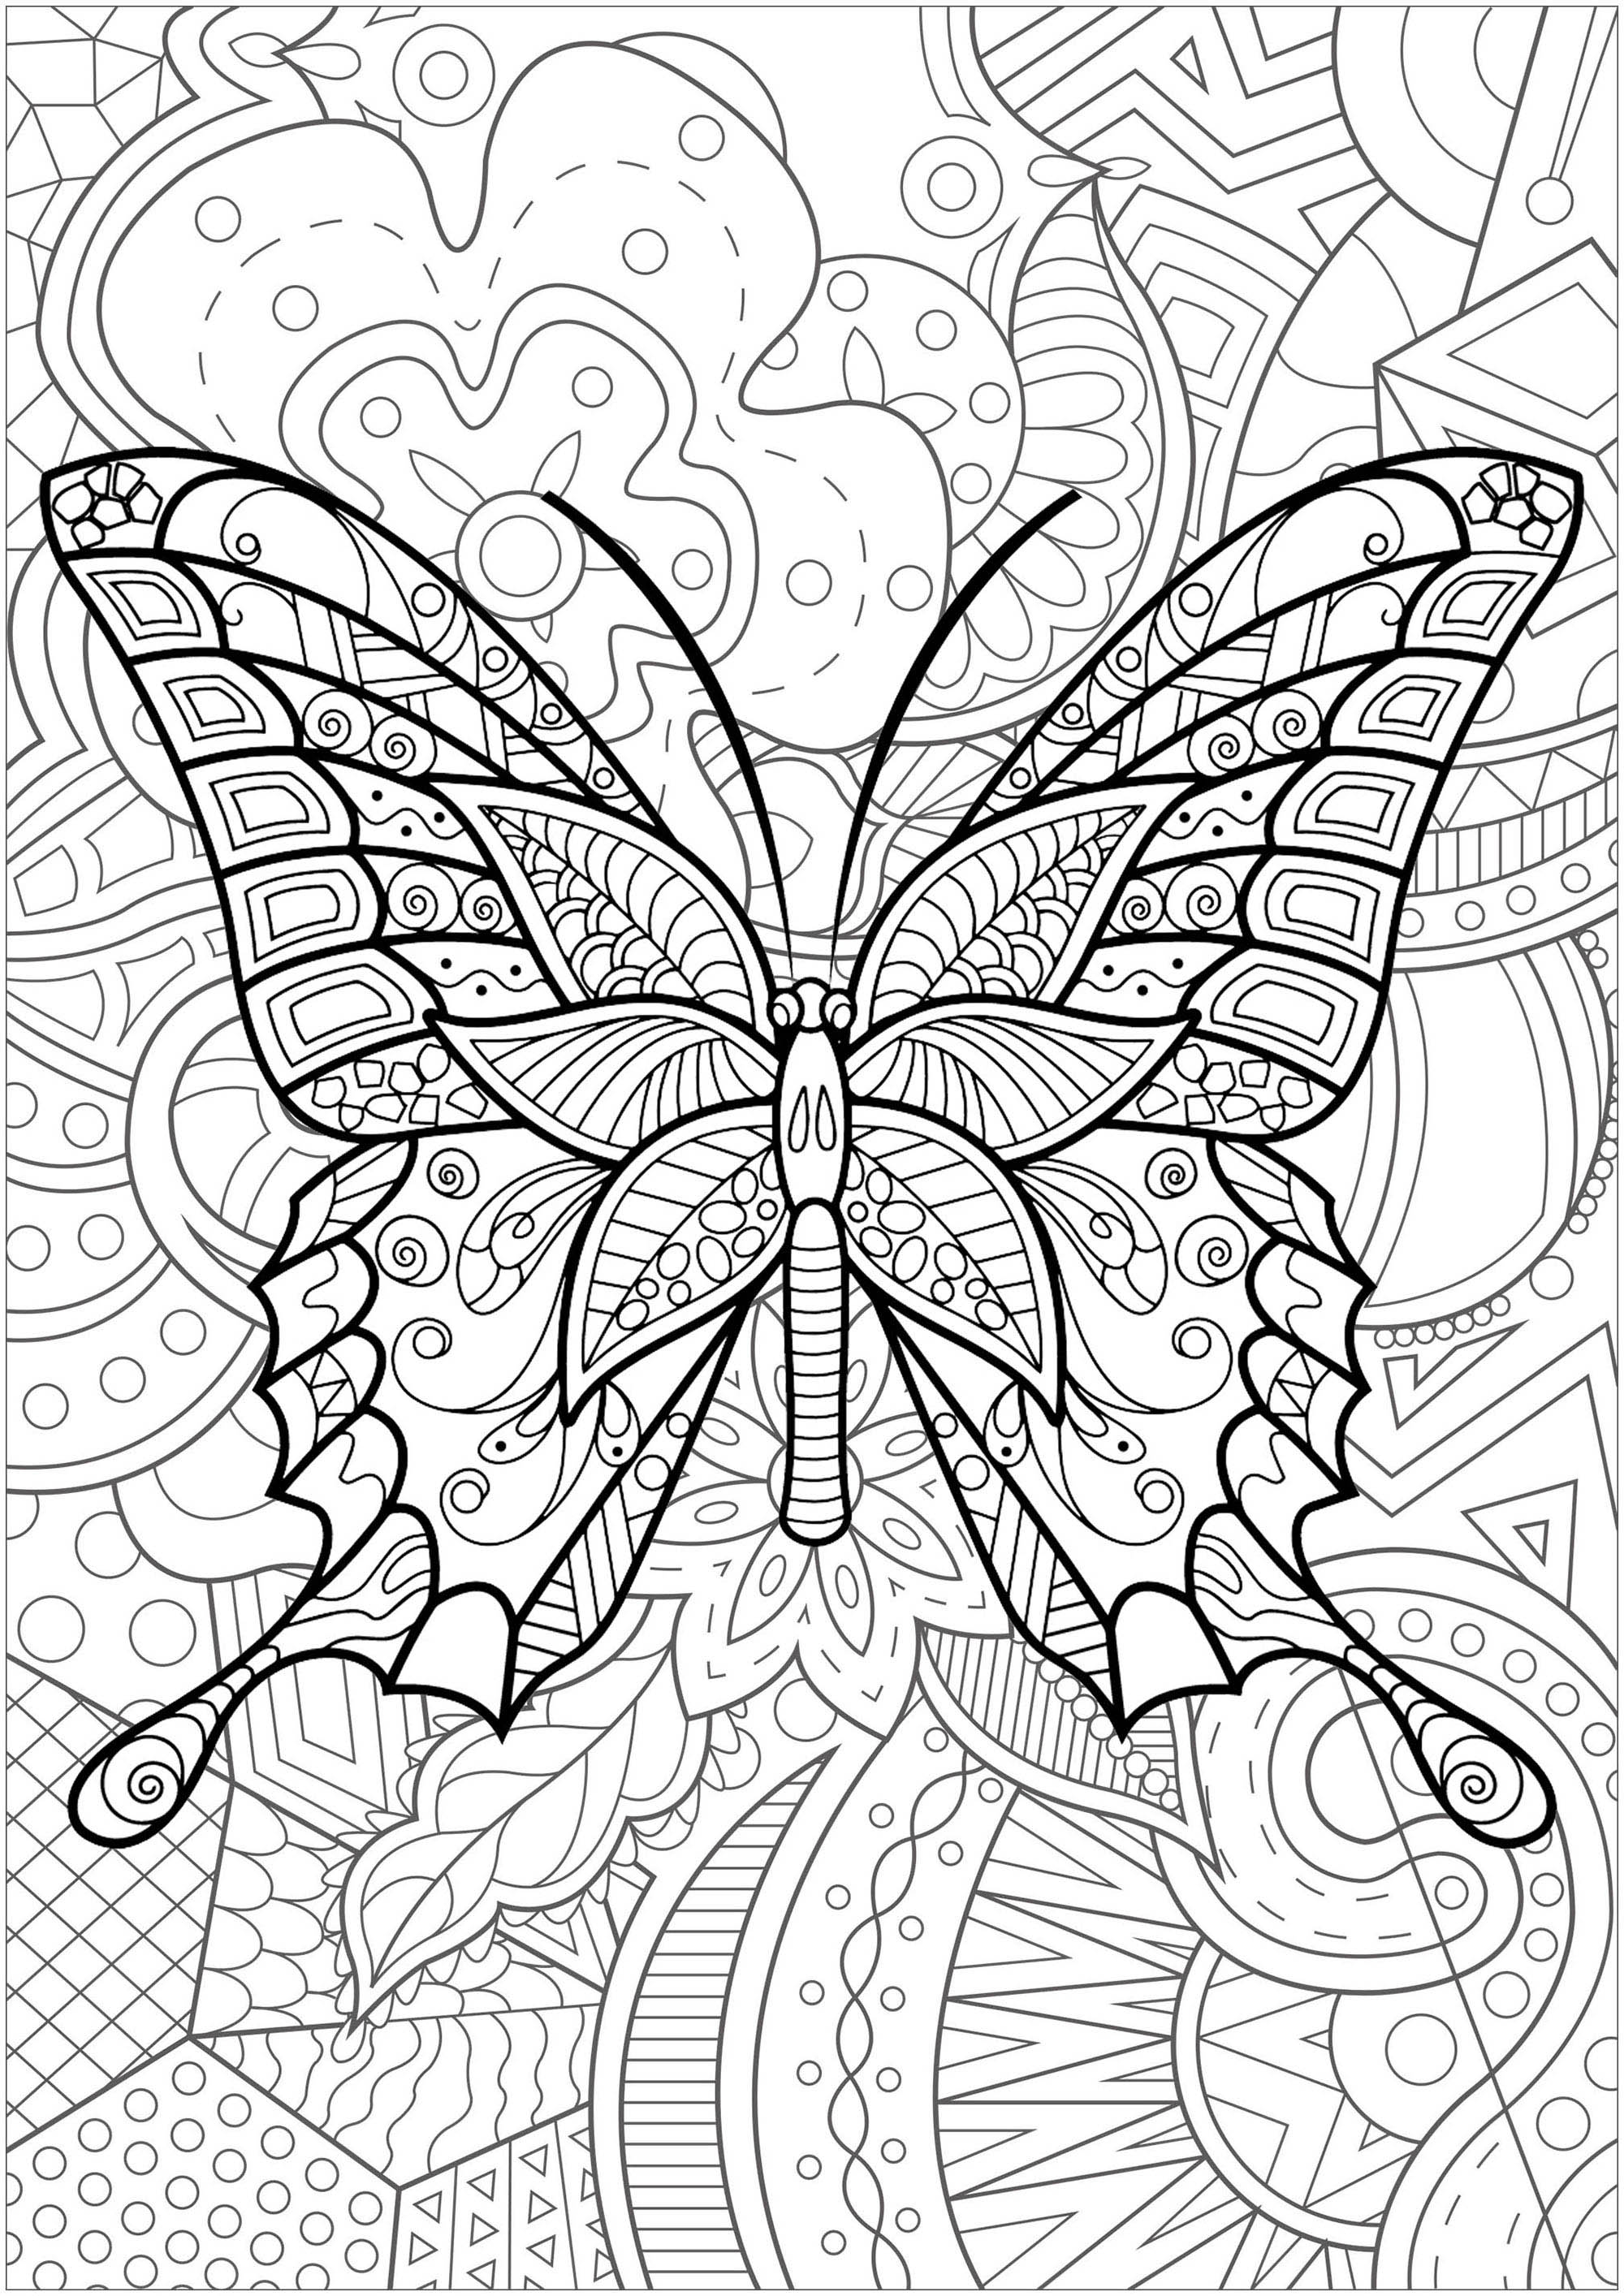 Butterfly with patterns inside and magnificent flowered background - 3, Artist : Art. Isabelle